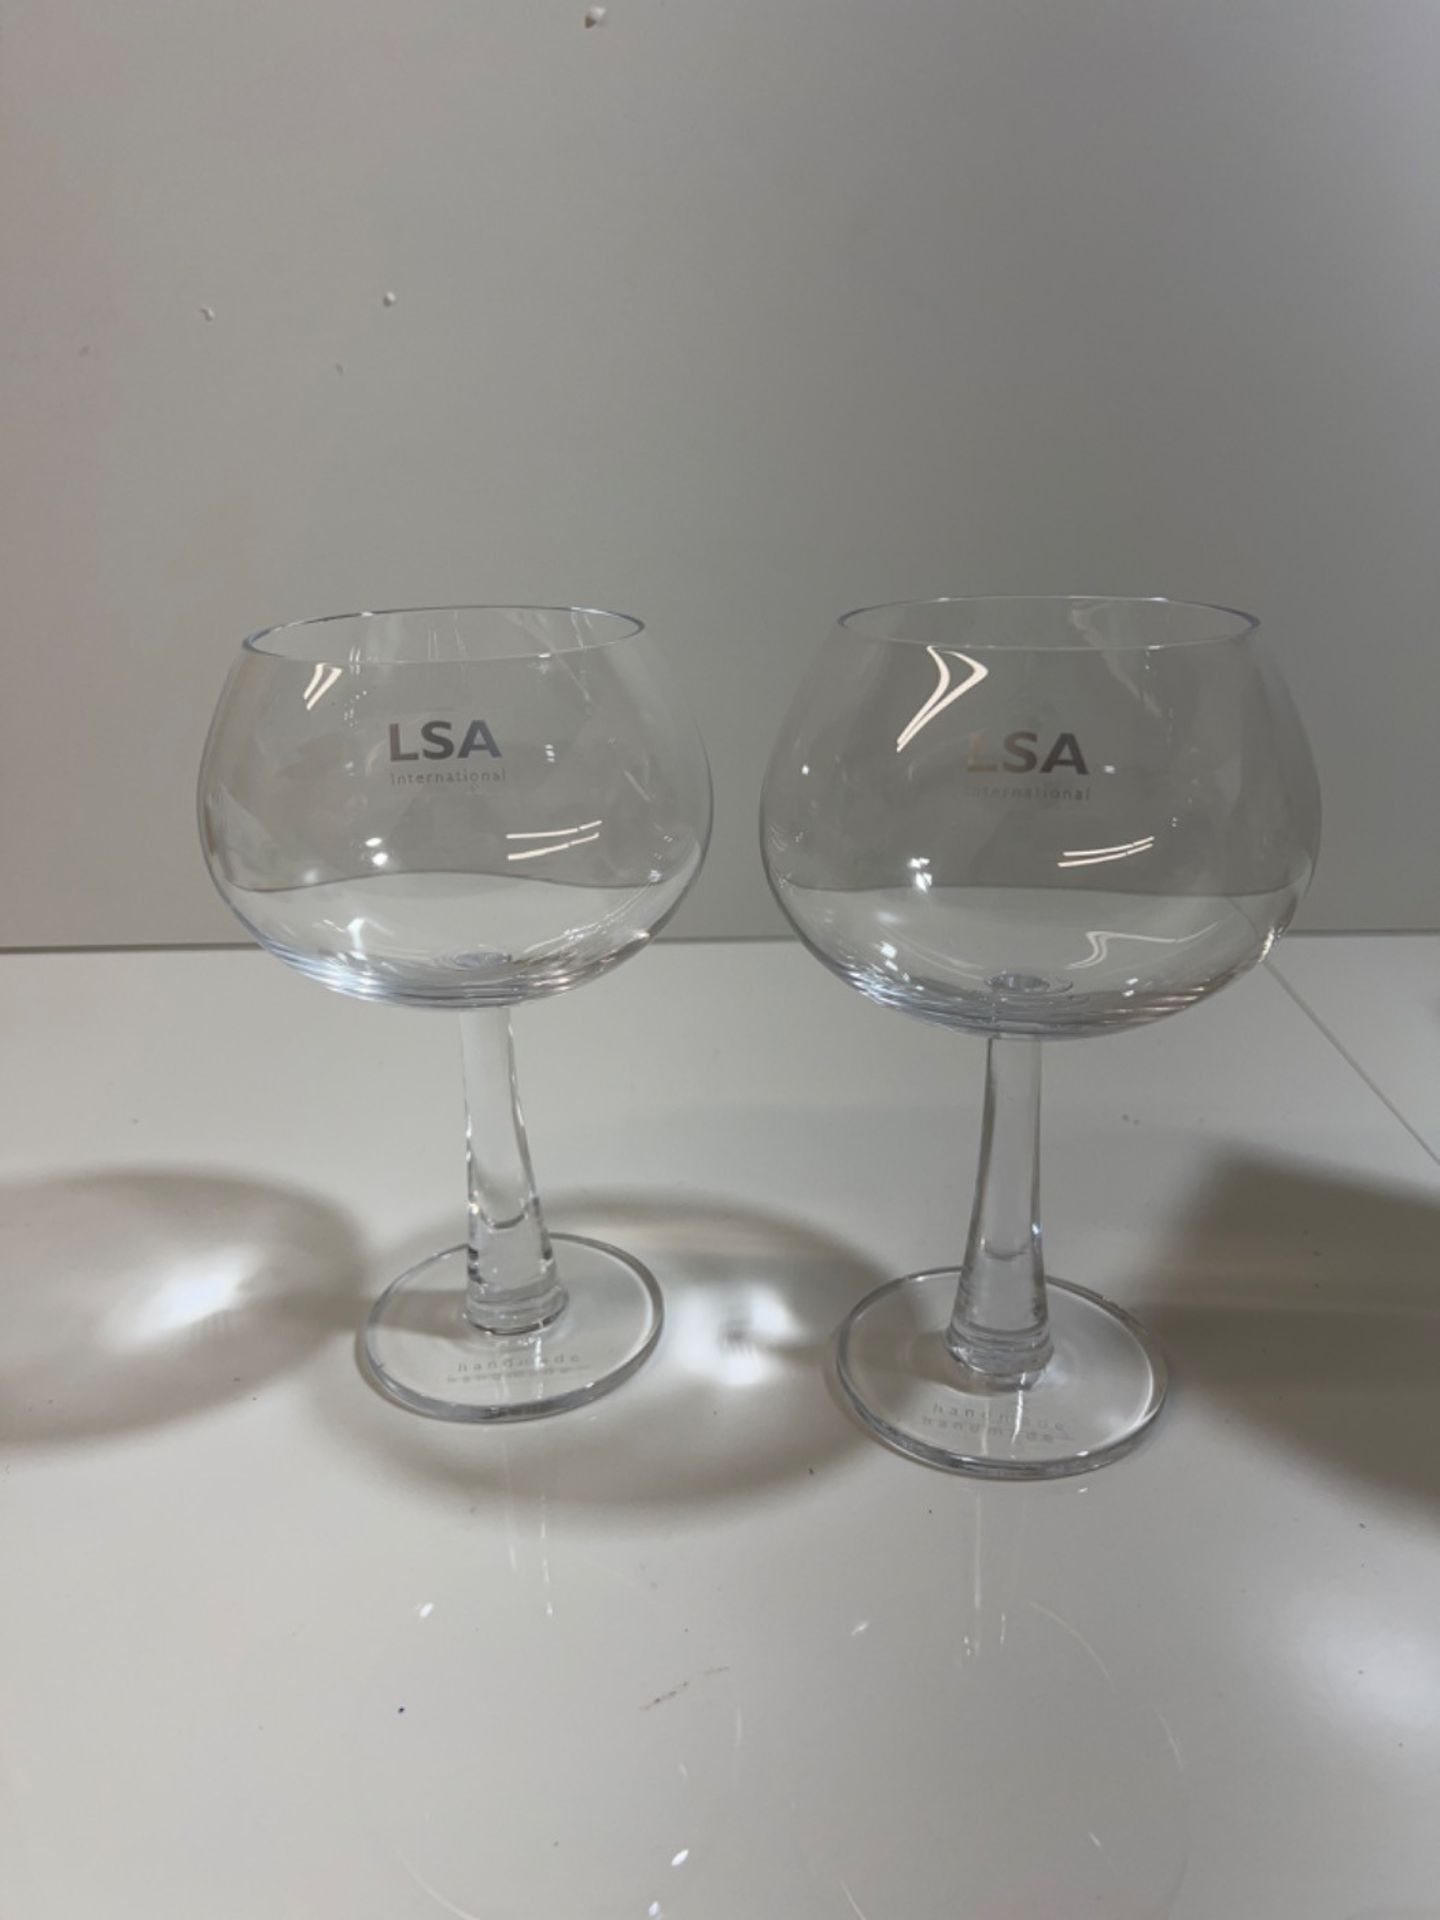 LSA International Gin Balloon Glass 420 ml Clear | Set of 2 | Mouthblown and Handmade Glass | GN03 - Image 2 of 3